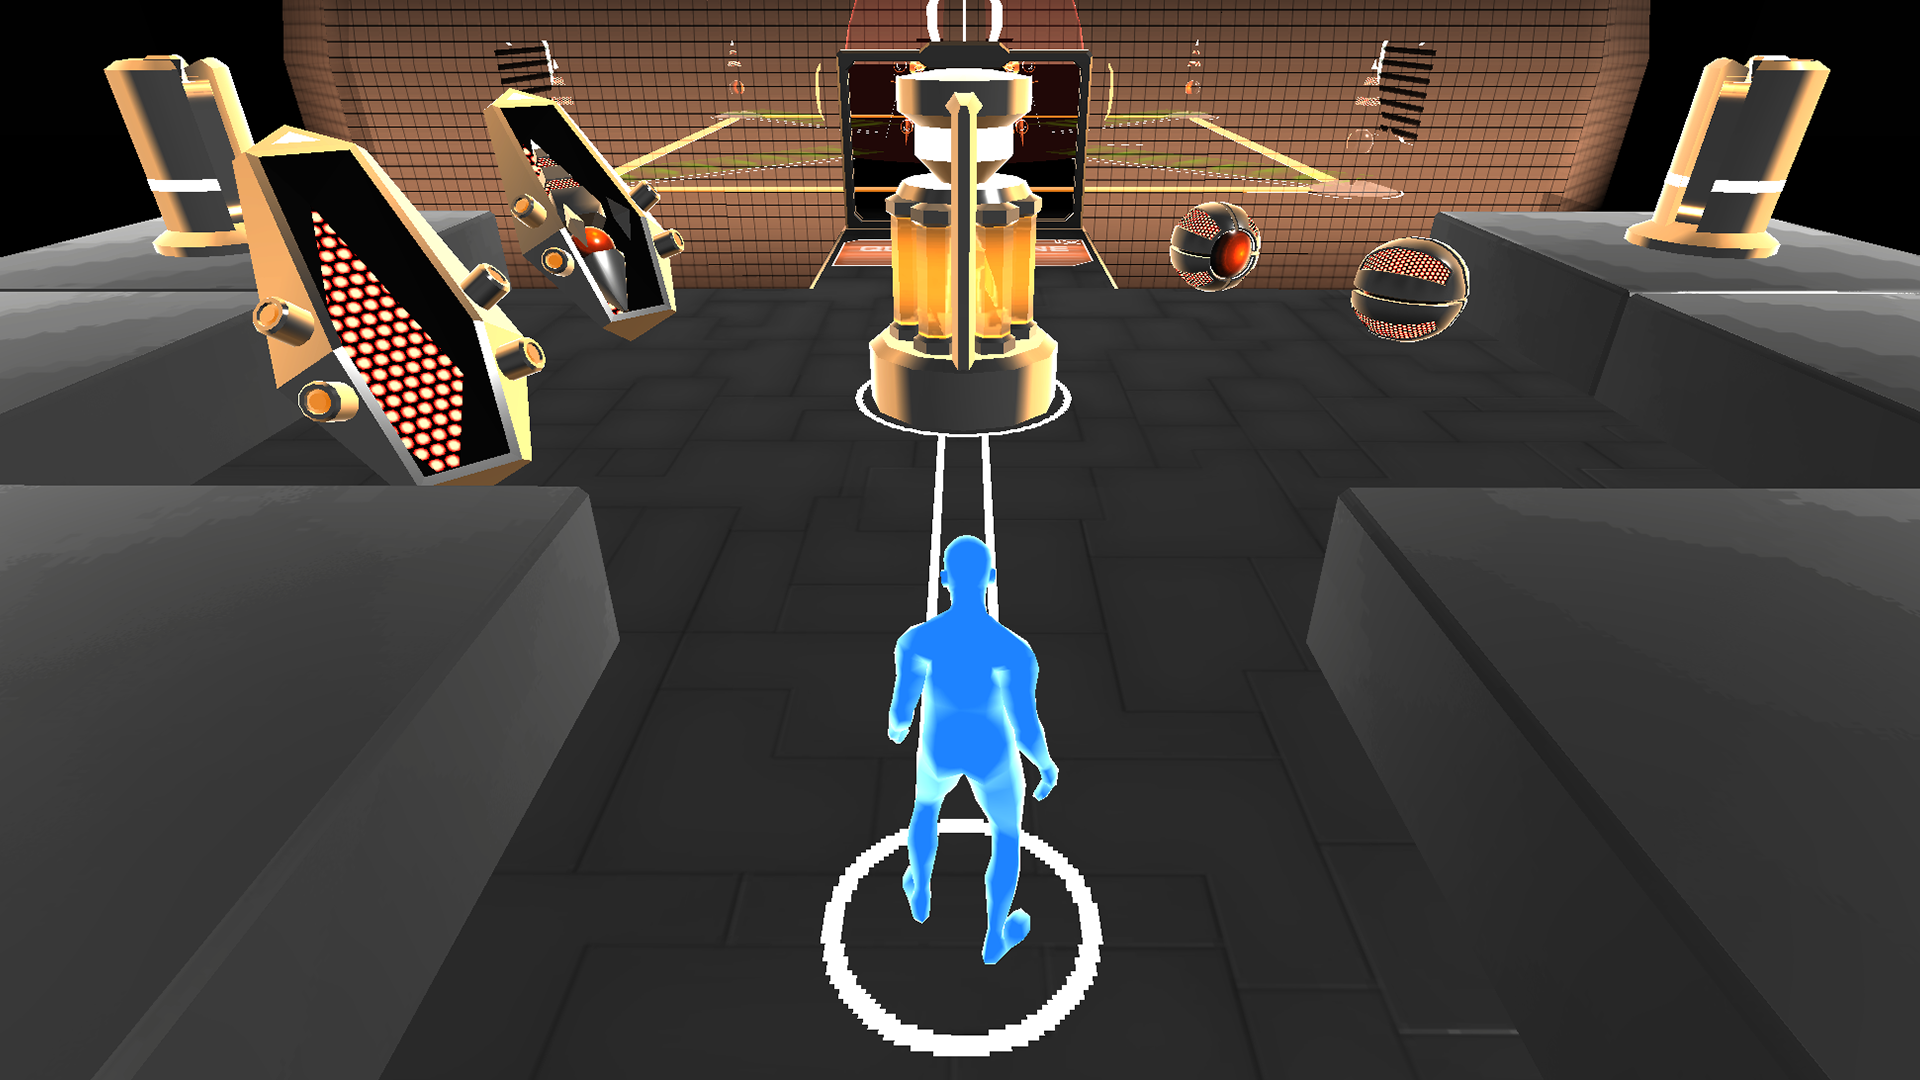 The player dashes to evade an enemy